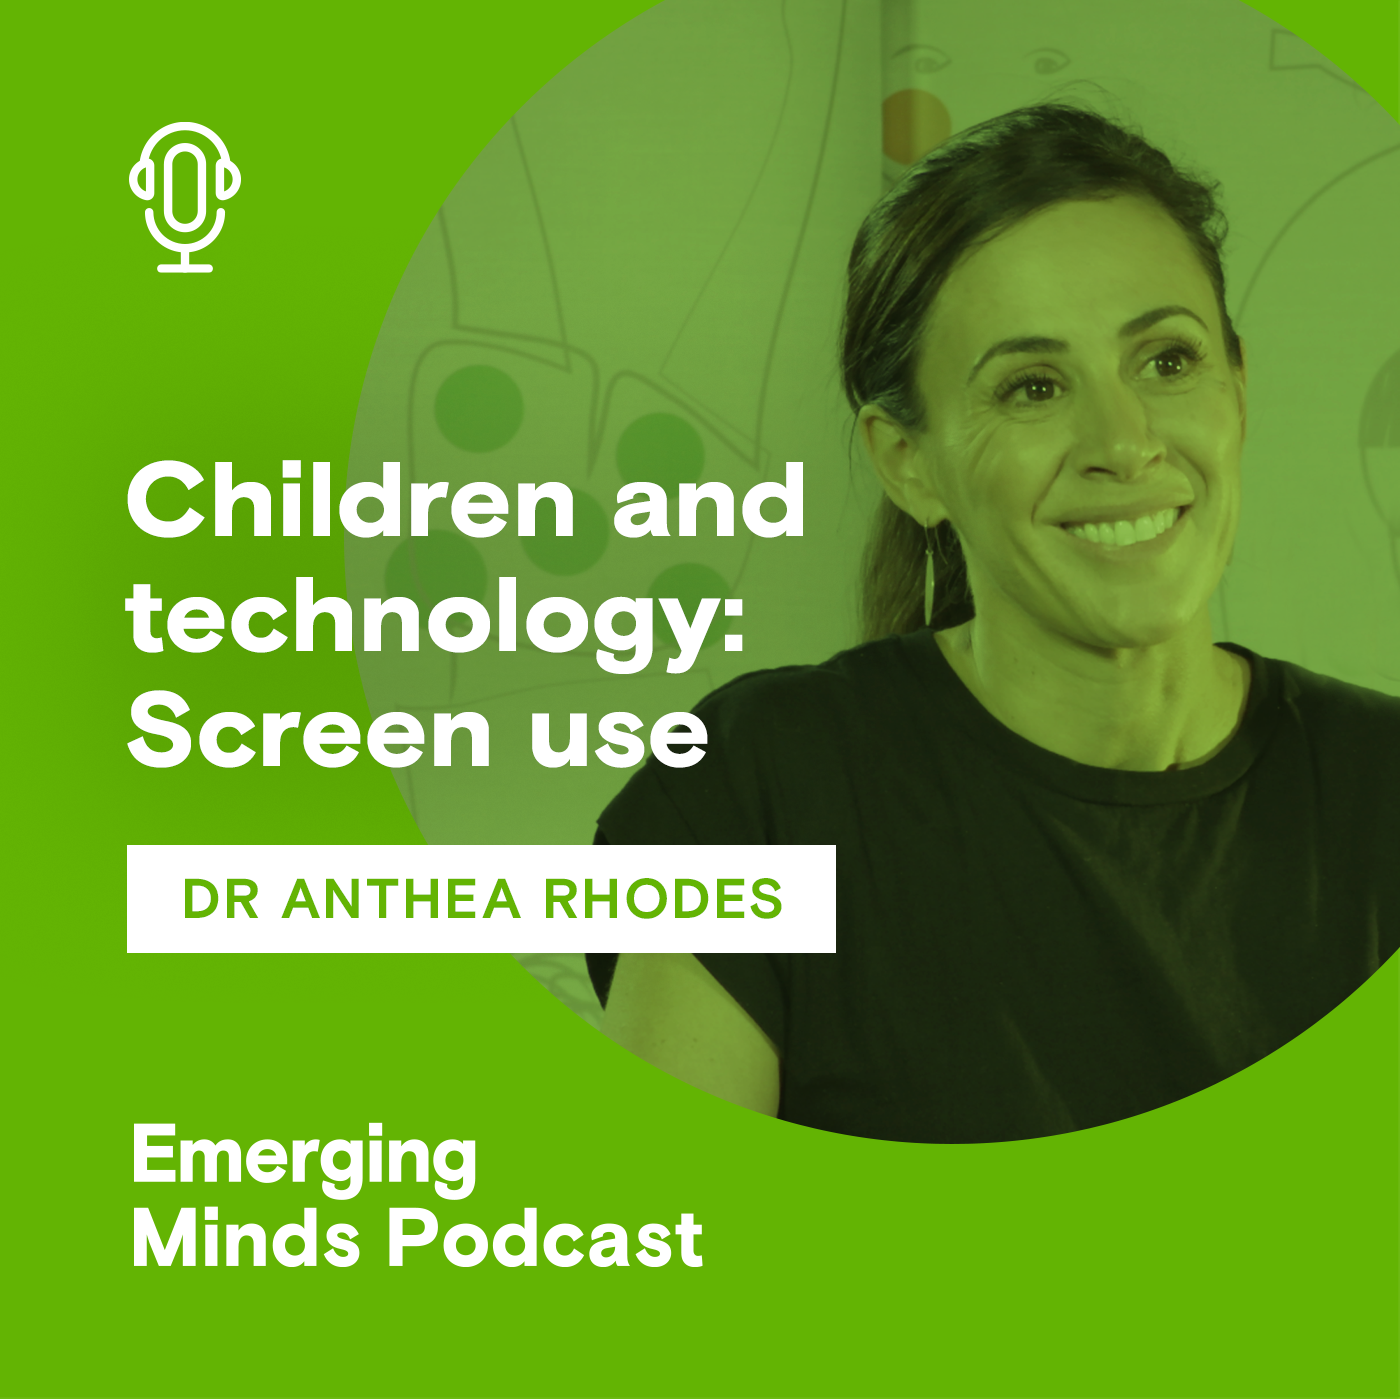 Children and technology: Screen use